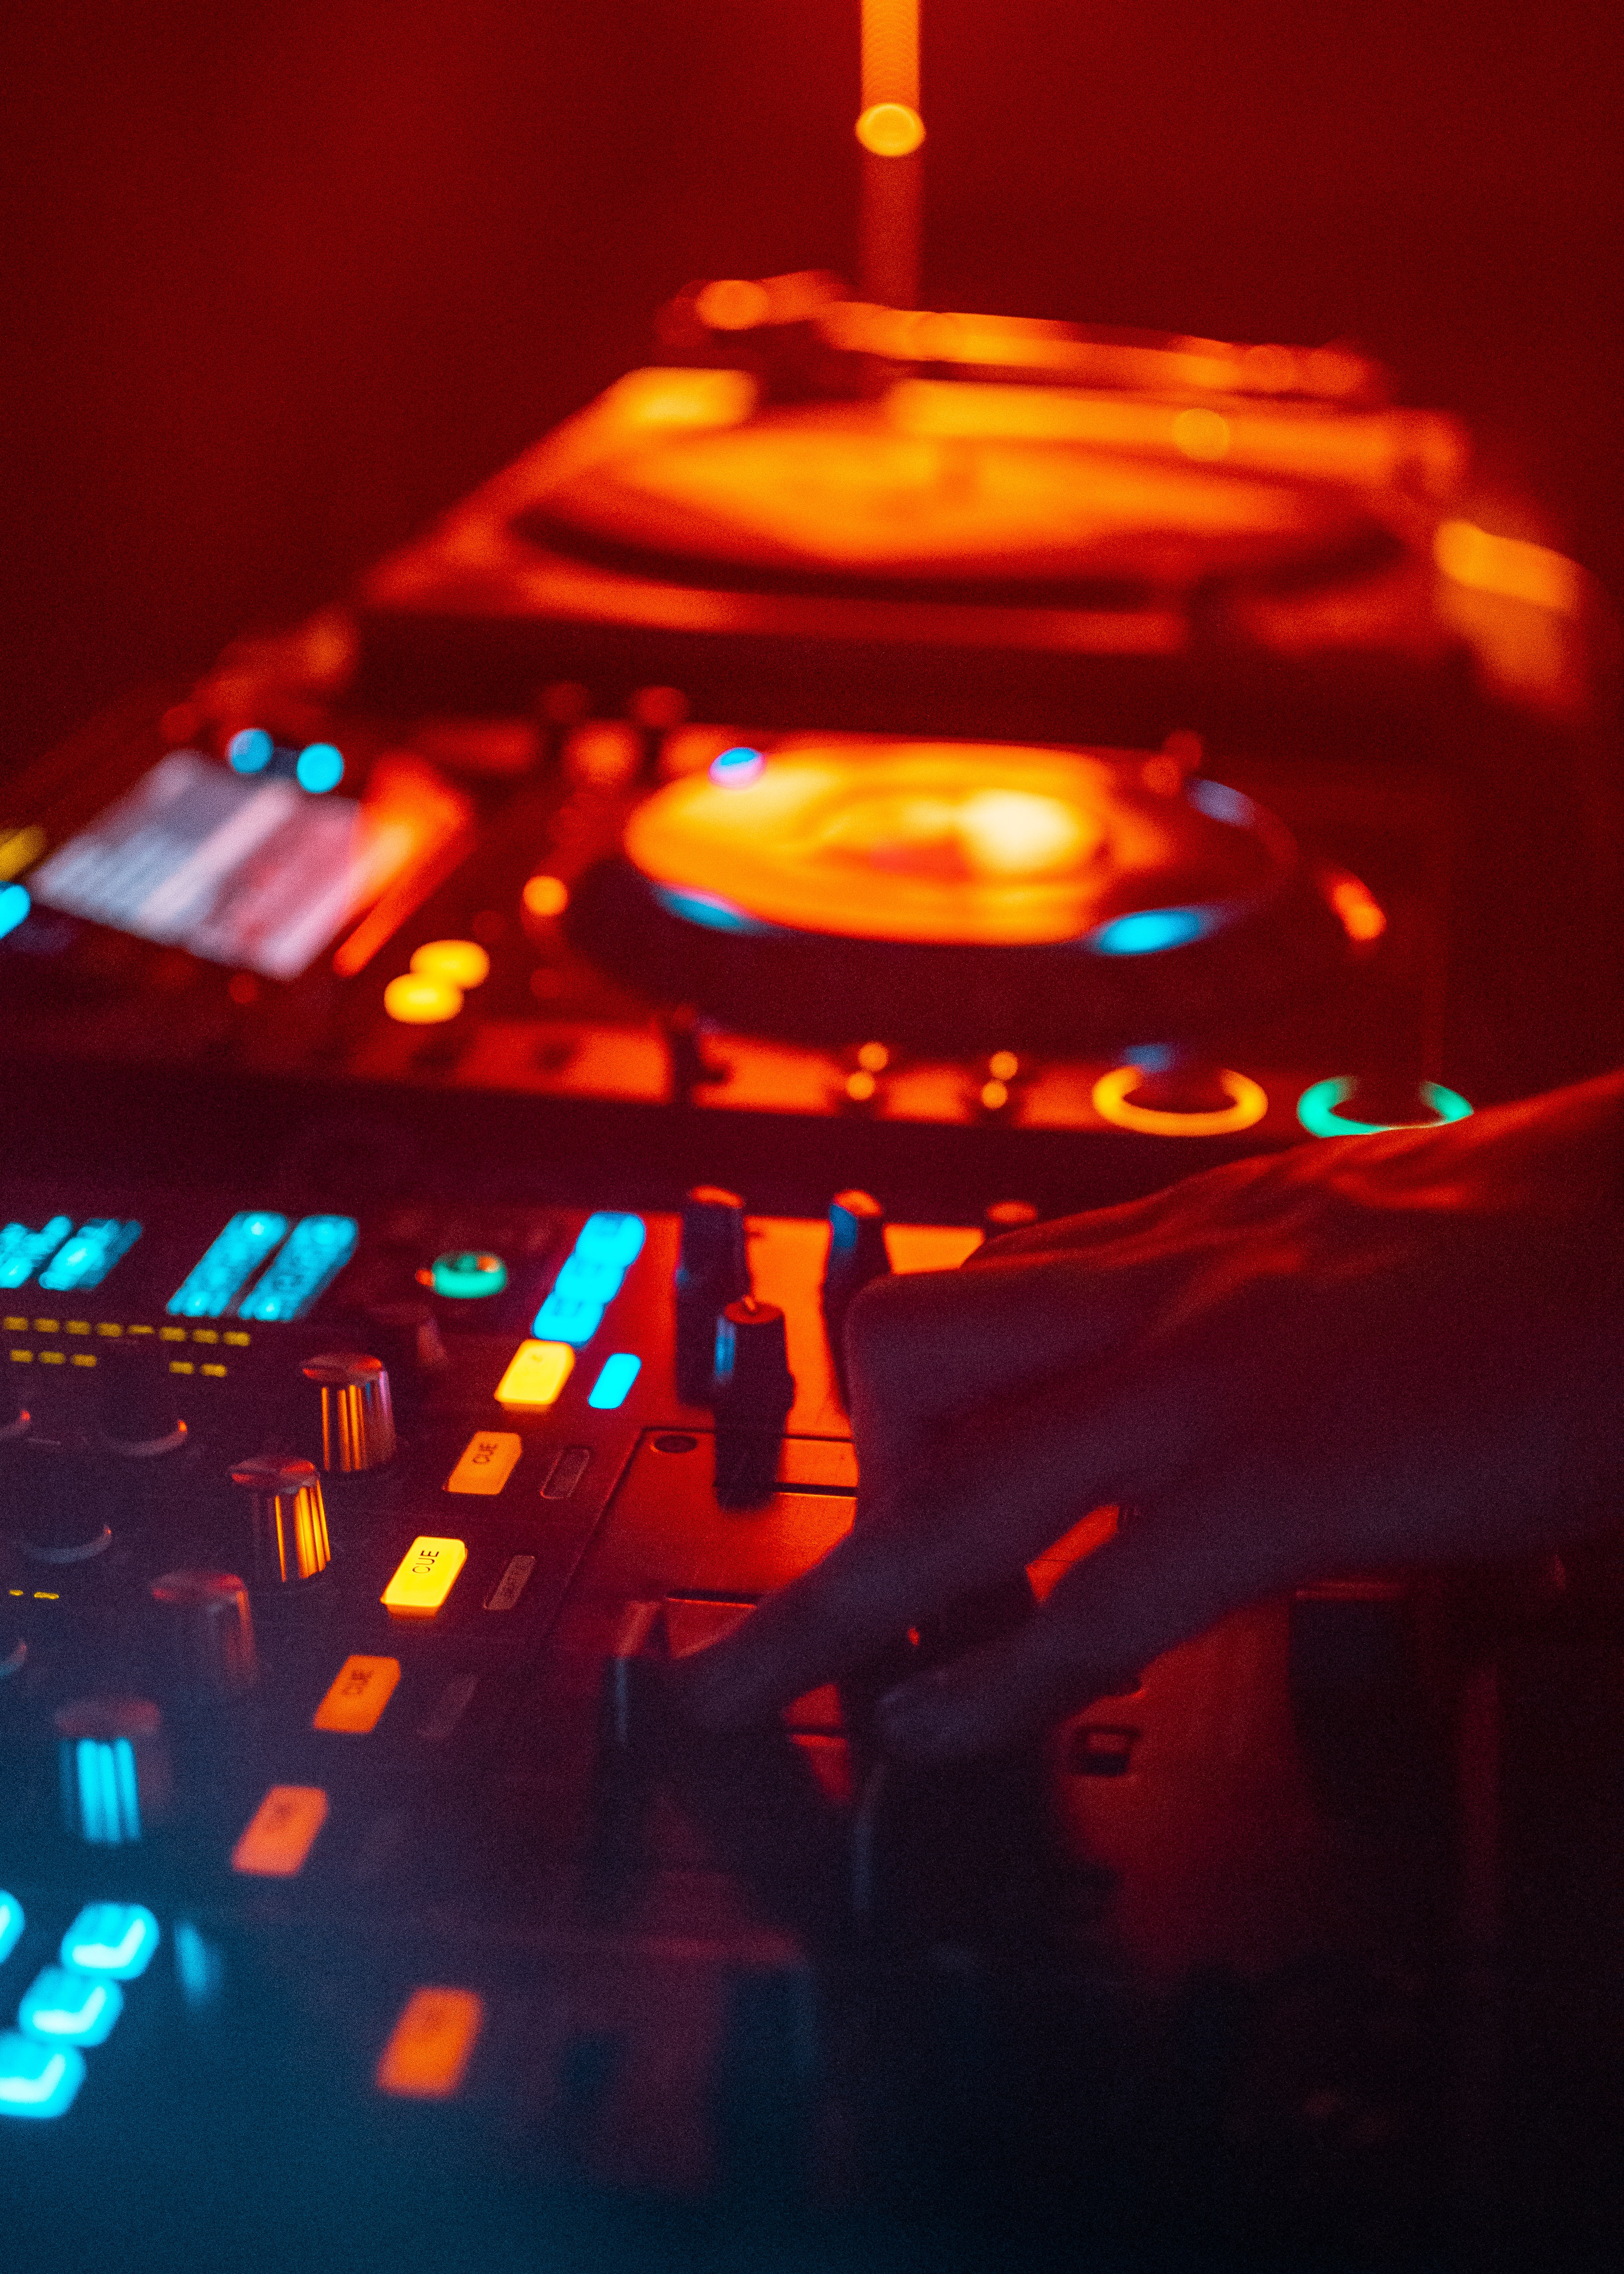 Download wallpaper 3646x5104 dj, mixer, hand, equalizer, electronic, music  hd background